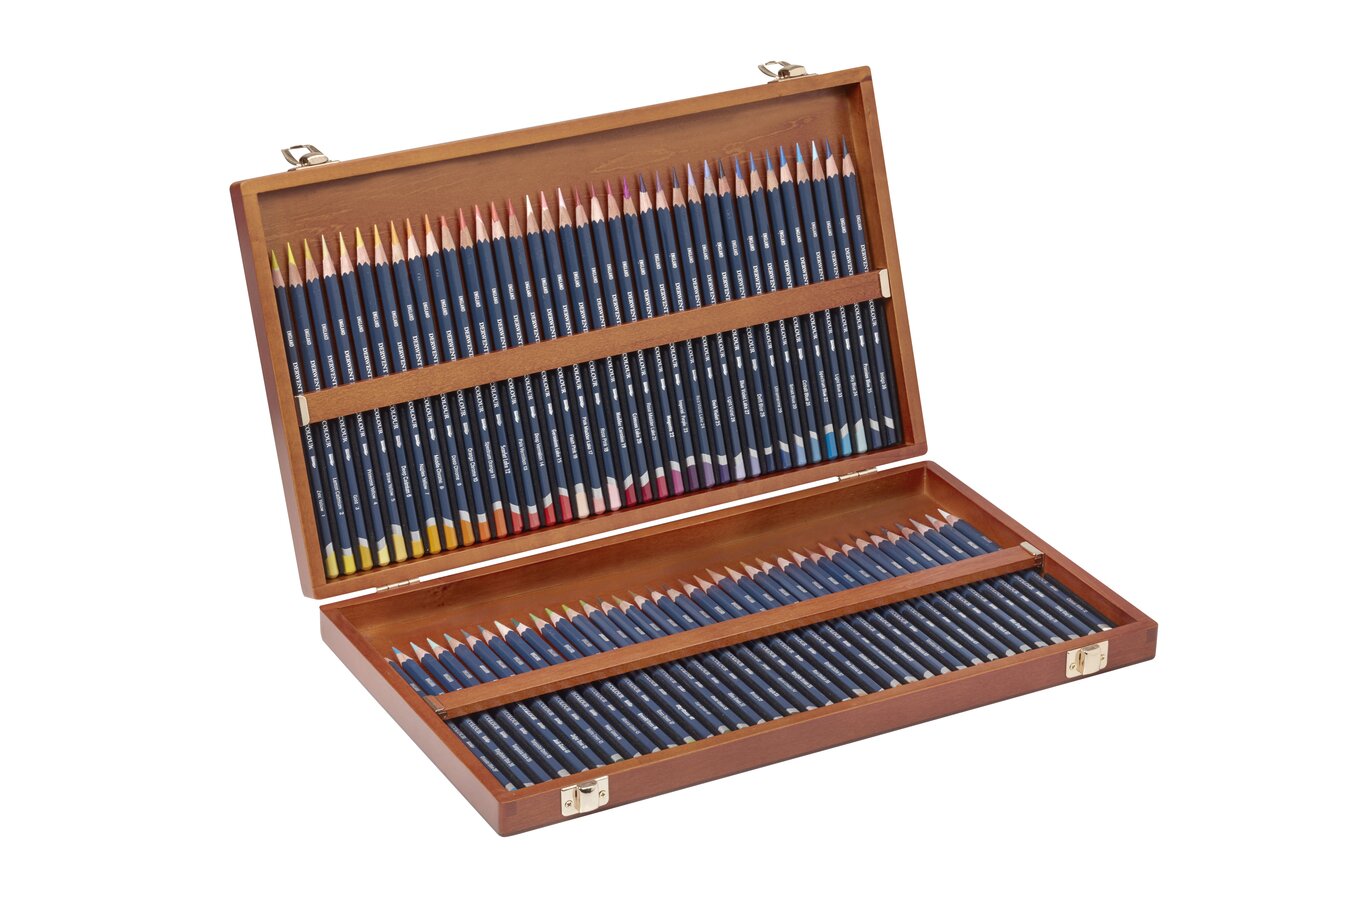  Derwent Colored Pencils, WaterColour, Water Color Pencils,  Drawing, Art, Wooden Box, 72 Count (32891) : Artists Pencils : Arts, Crafts  & Sewing